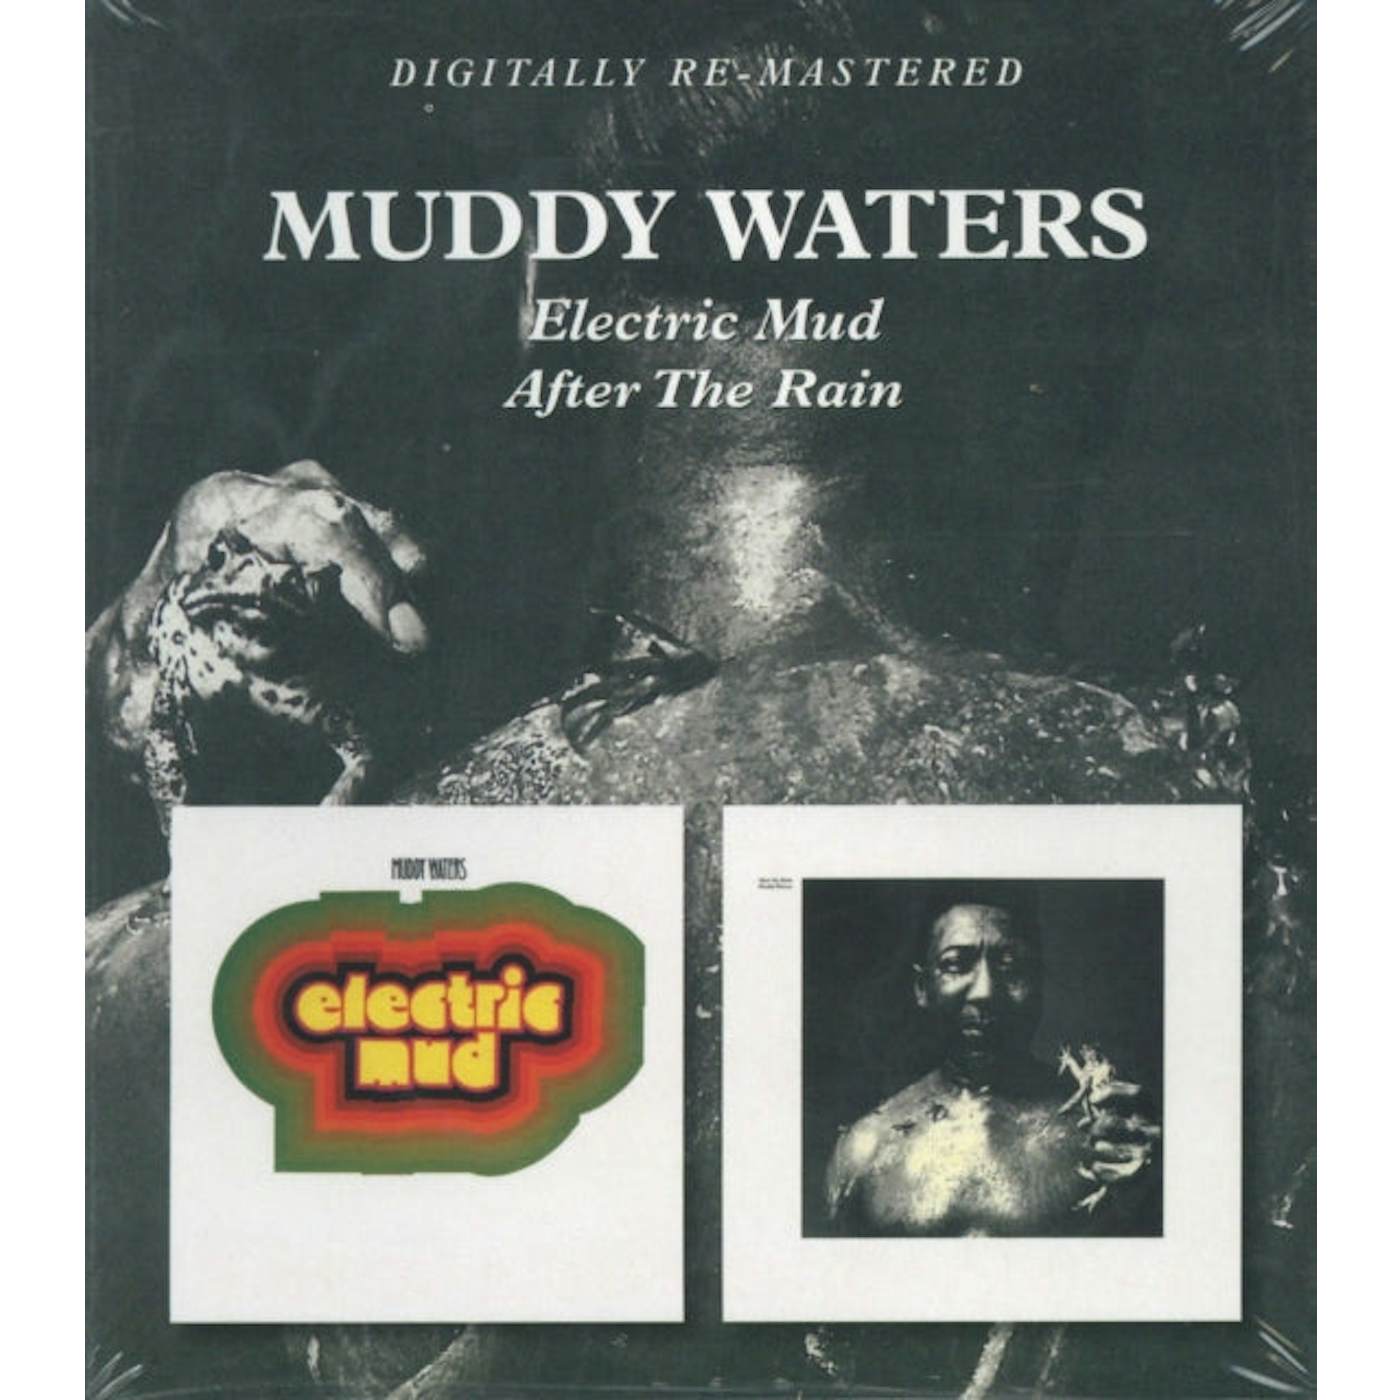 Muddy Waters CD - Electric Mud / After The Rain